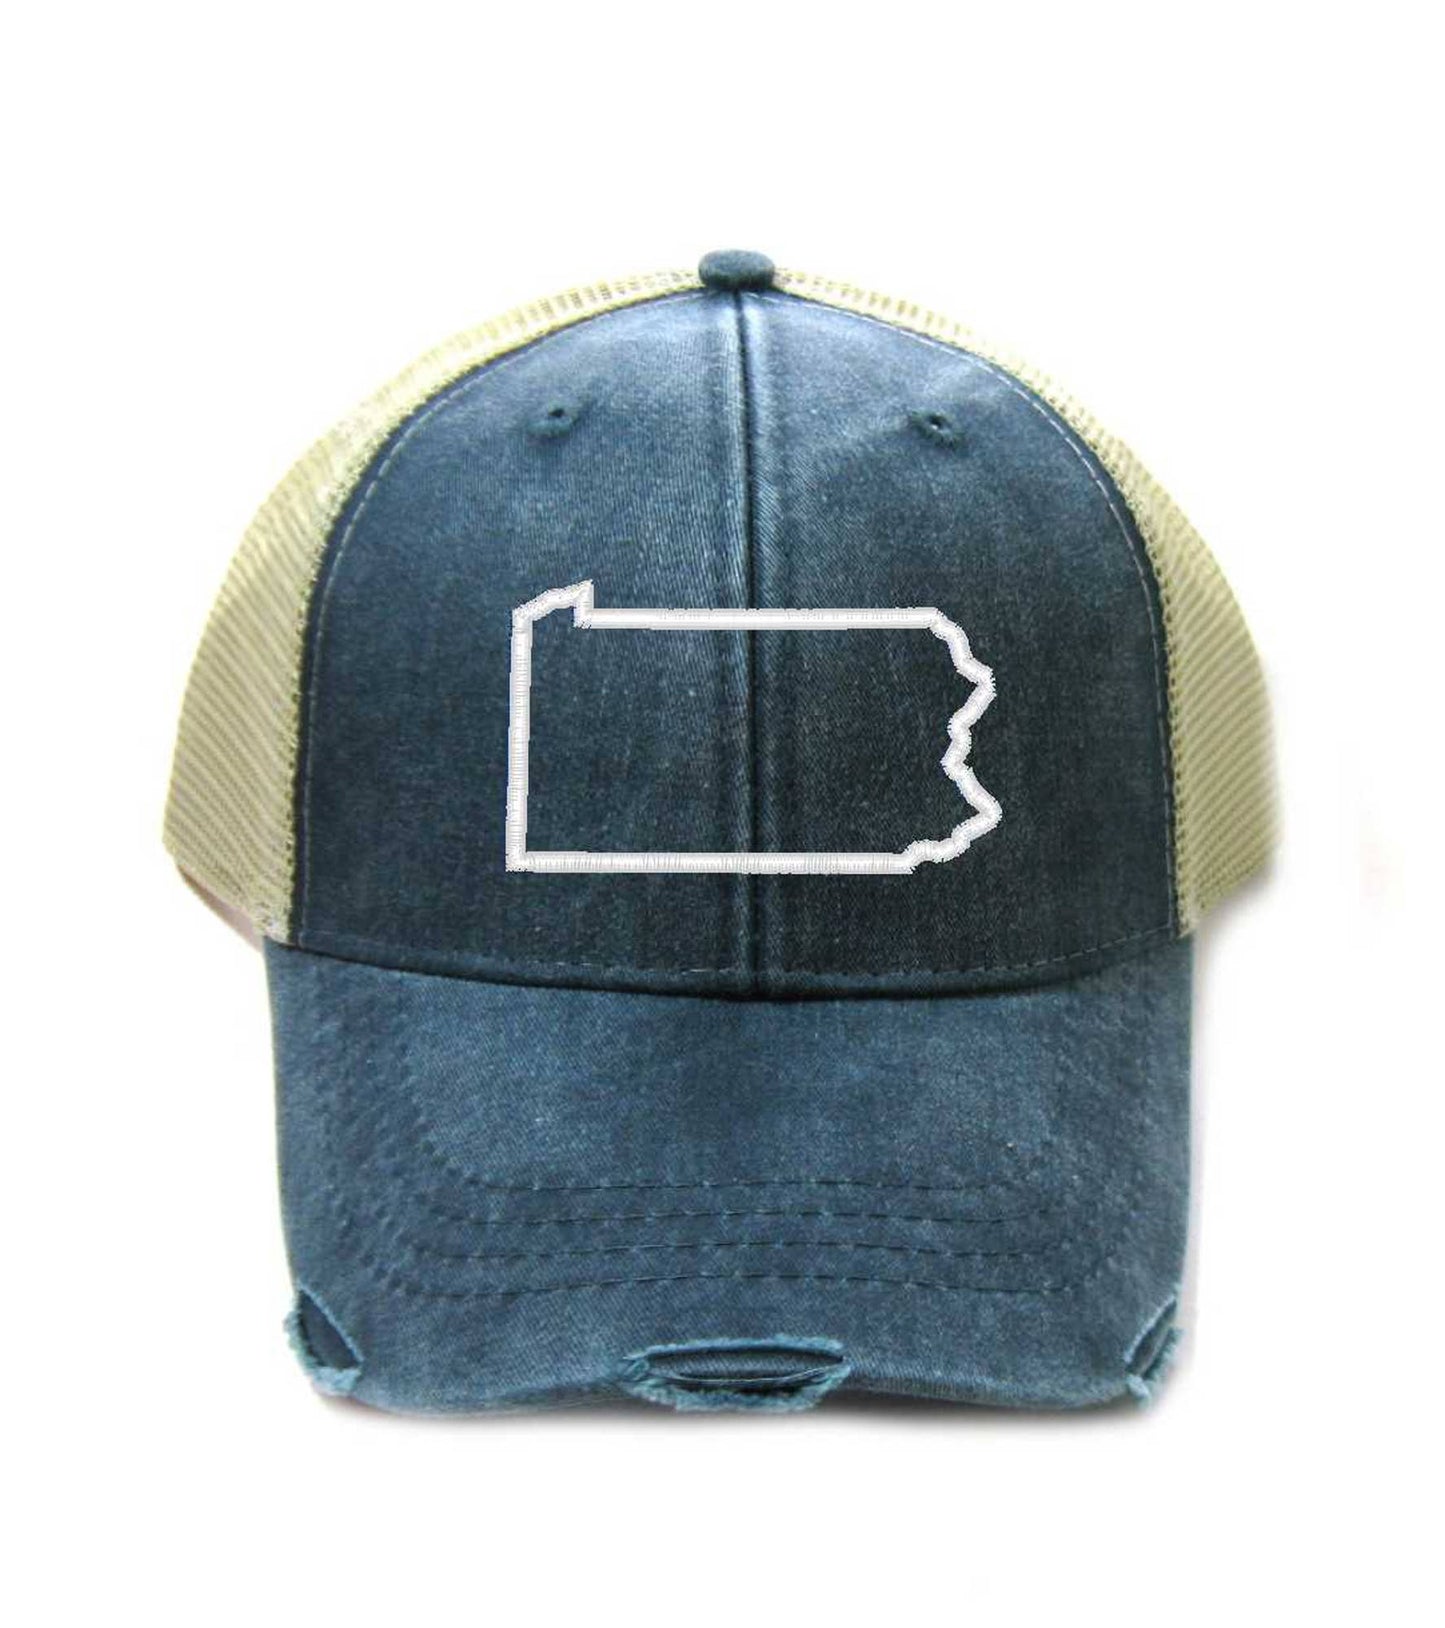 Pennsylvania Hat - Distressed Snapback Trucker Hat - Pennsylvania State Outline - Many Colors Available